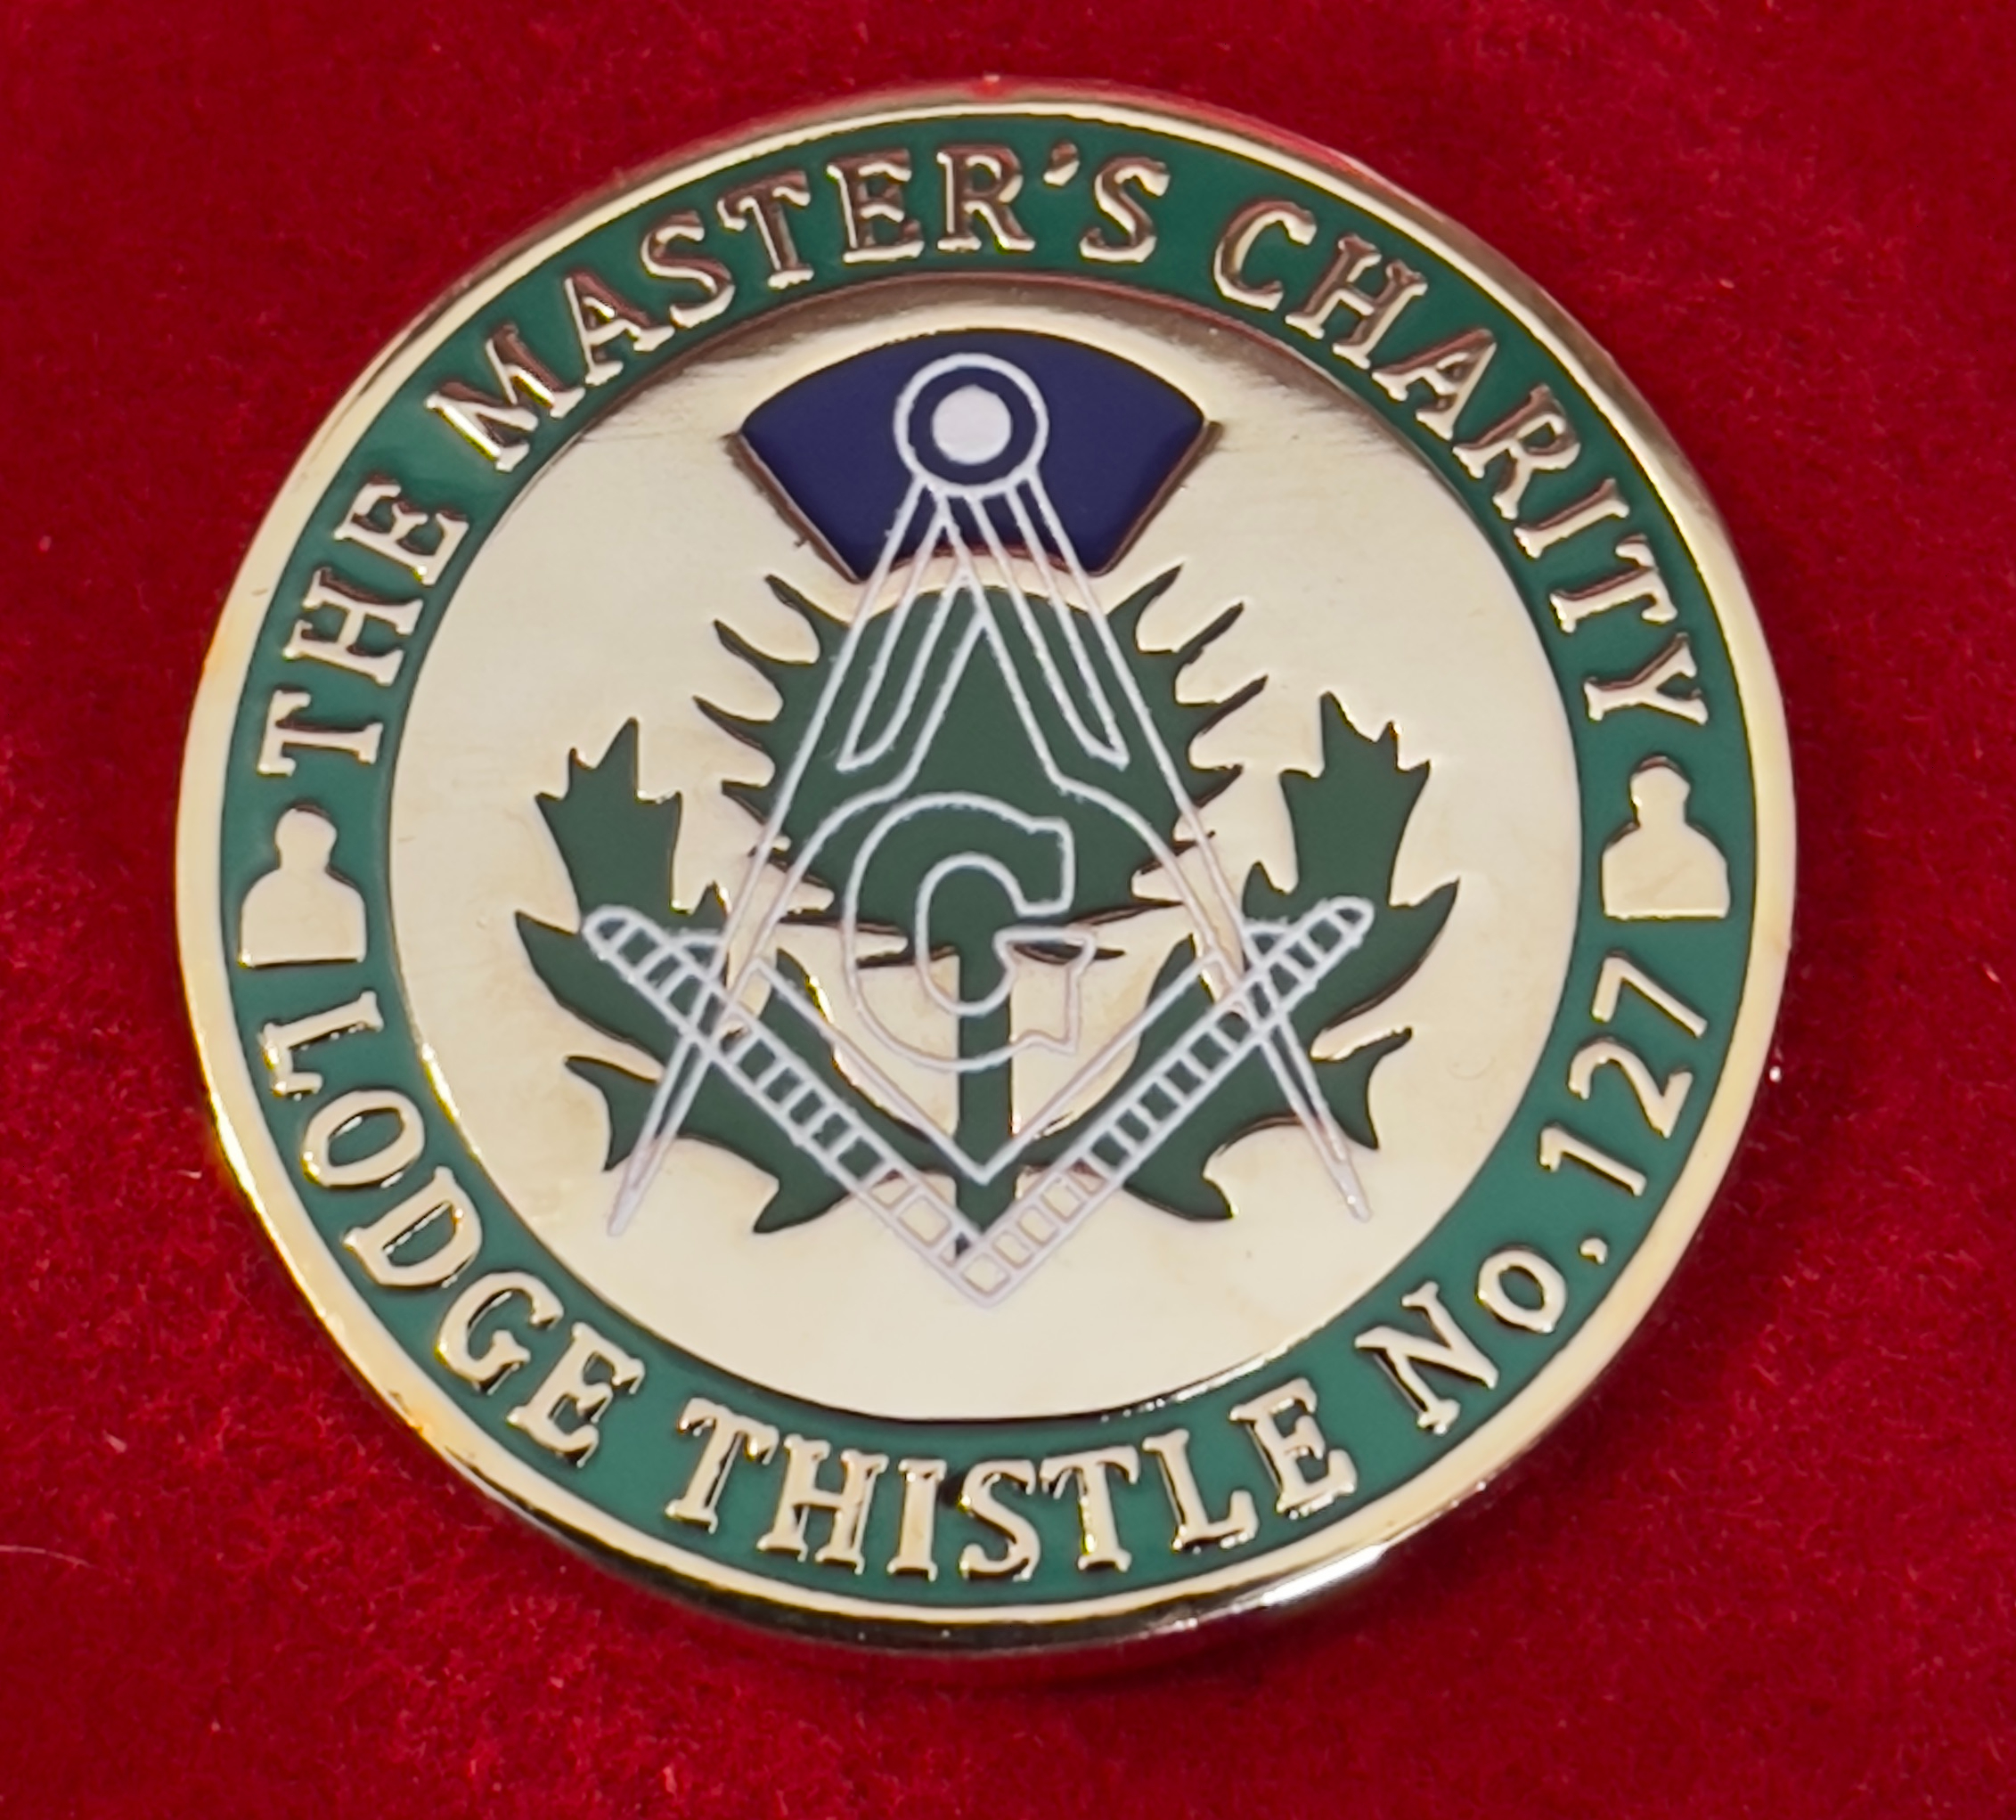 Lodge Thistle 127 Master's Charity Token